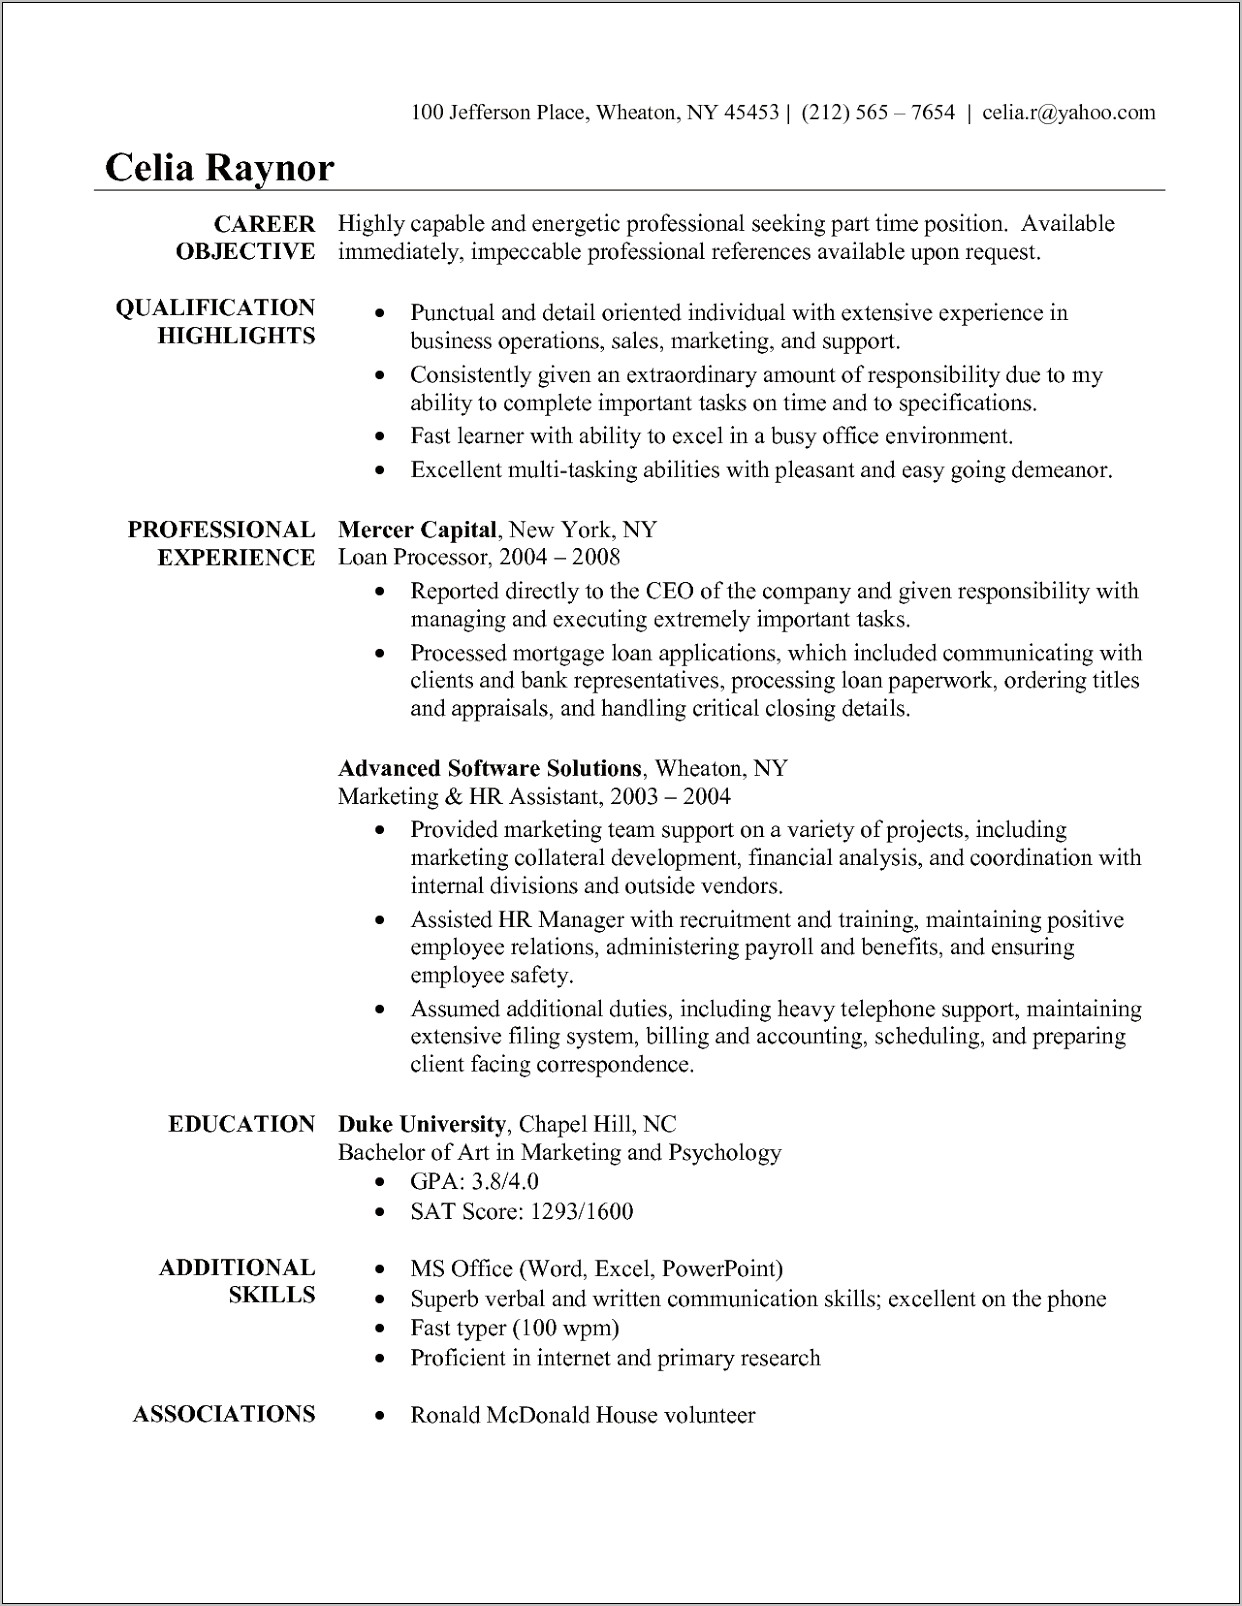 Resume Objectives Examples For Administrative Assistant